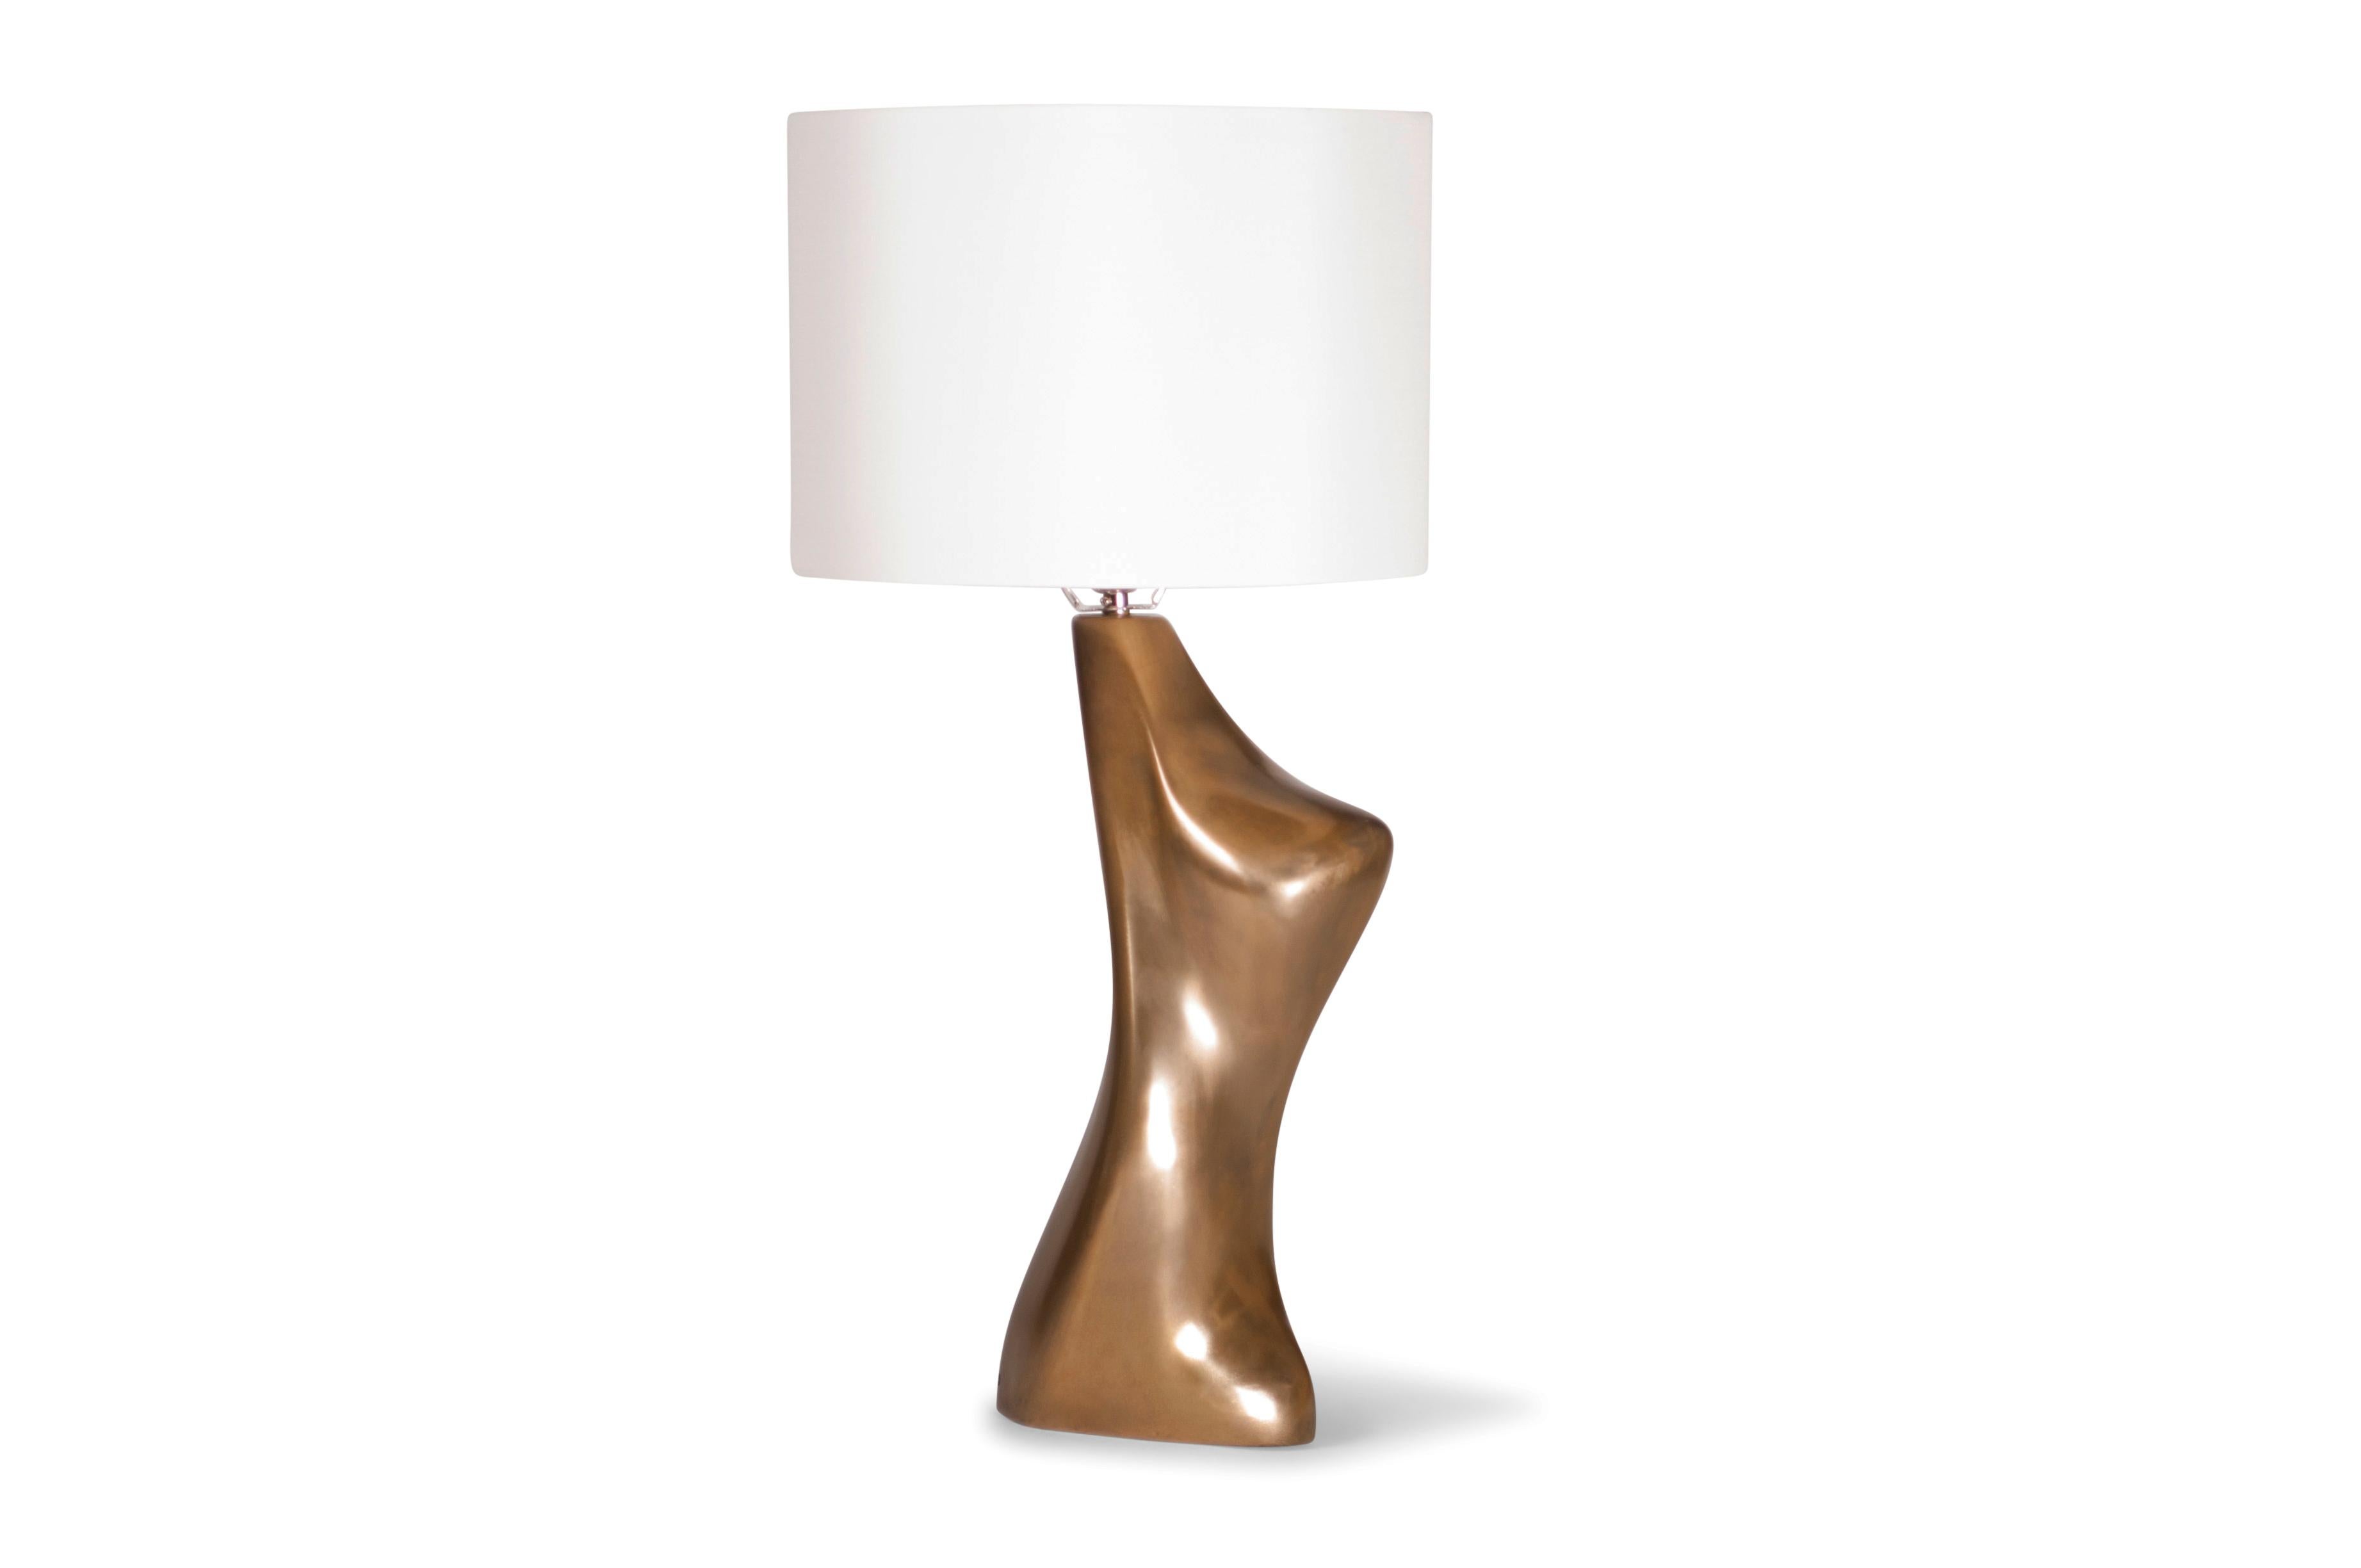 Helen table lamp is a dynamic shape table lamp with gold finish.
Dimension of the table lamp is 8